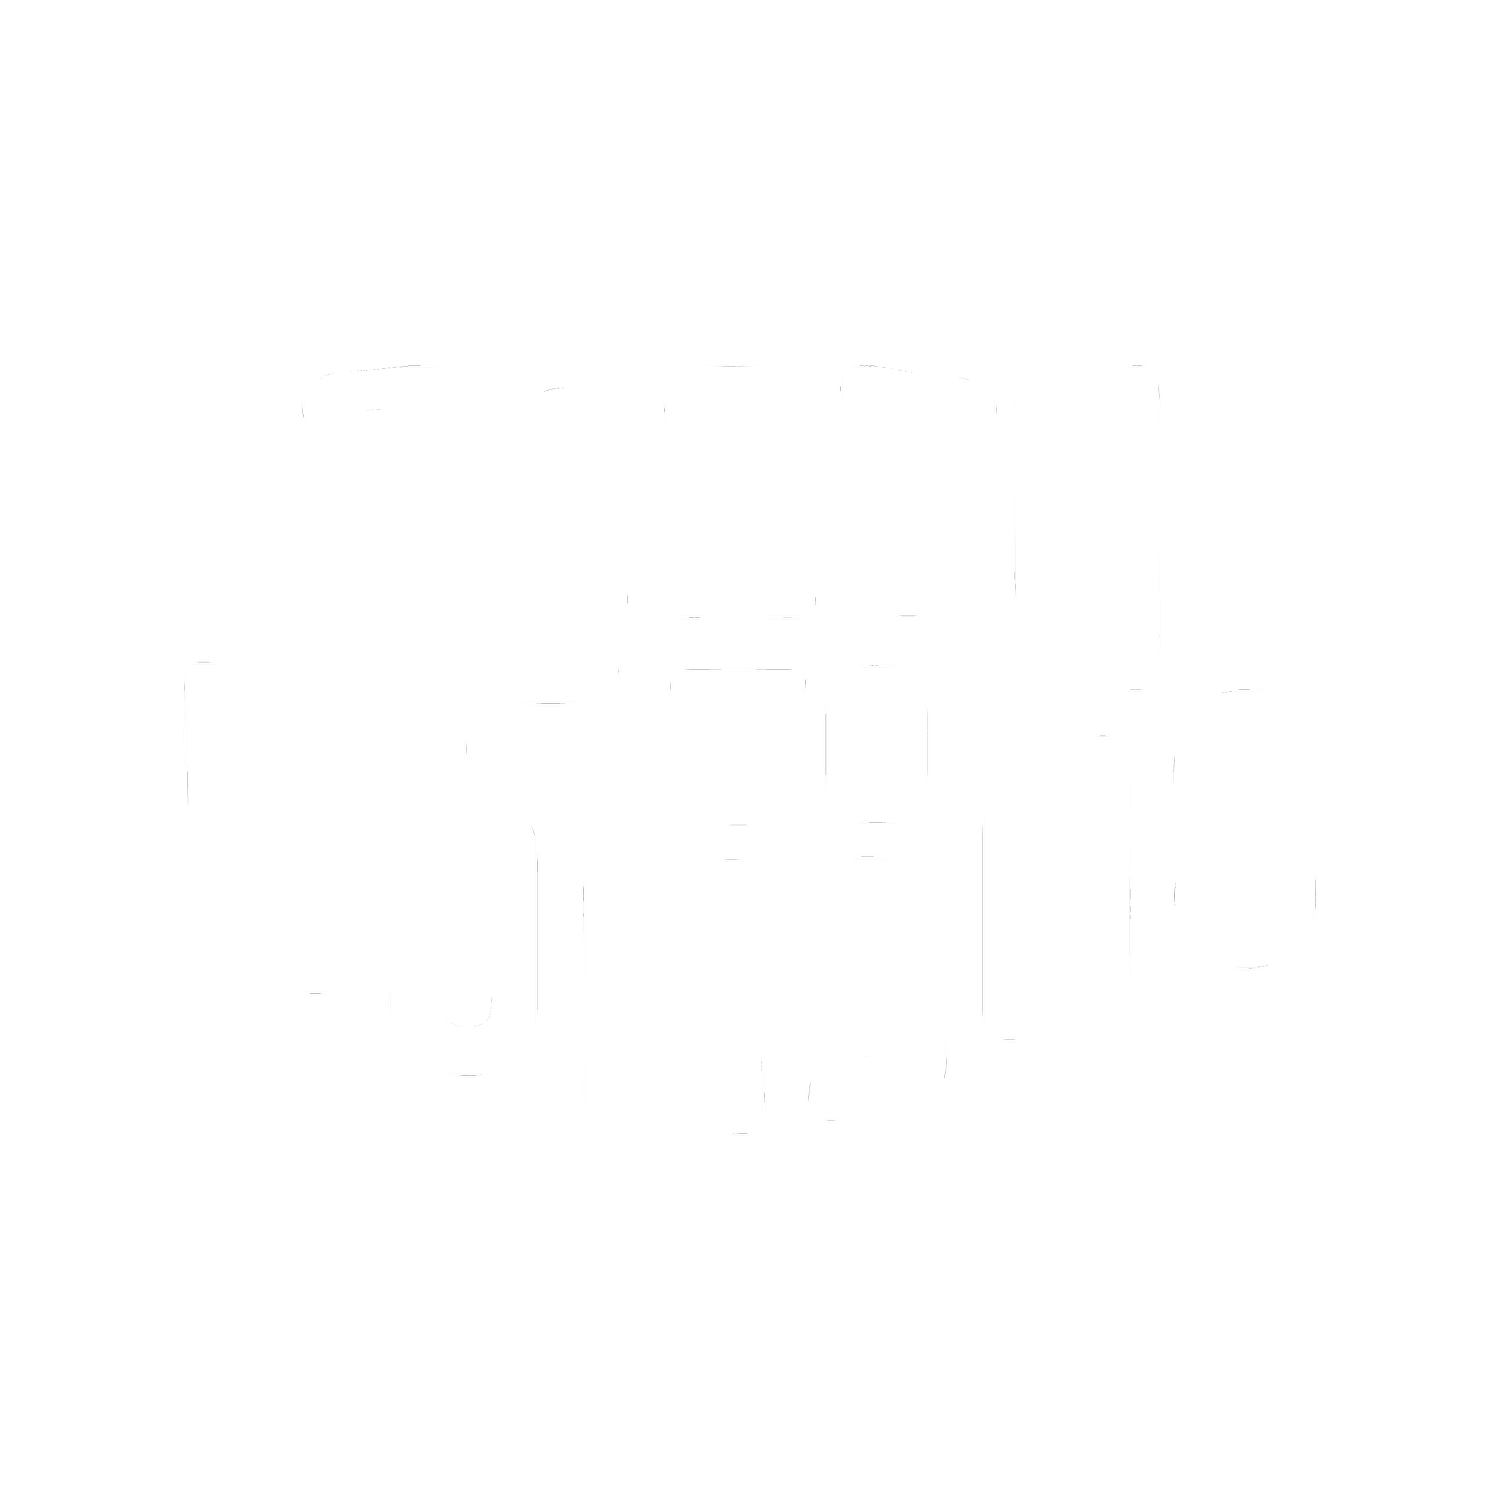 Earth to Humans